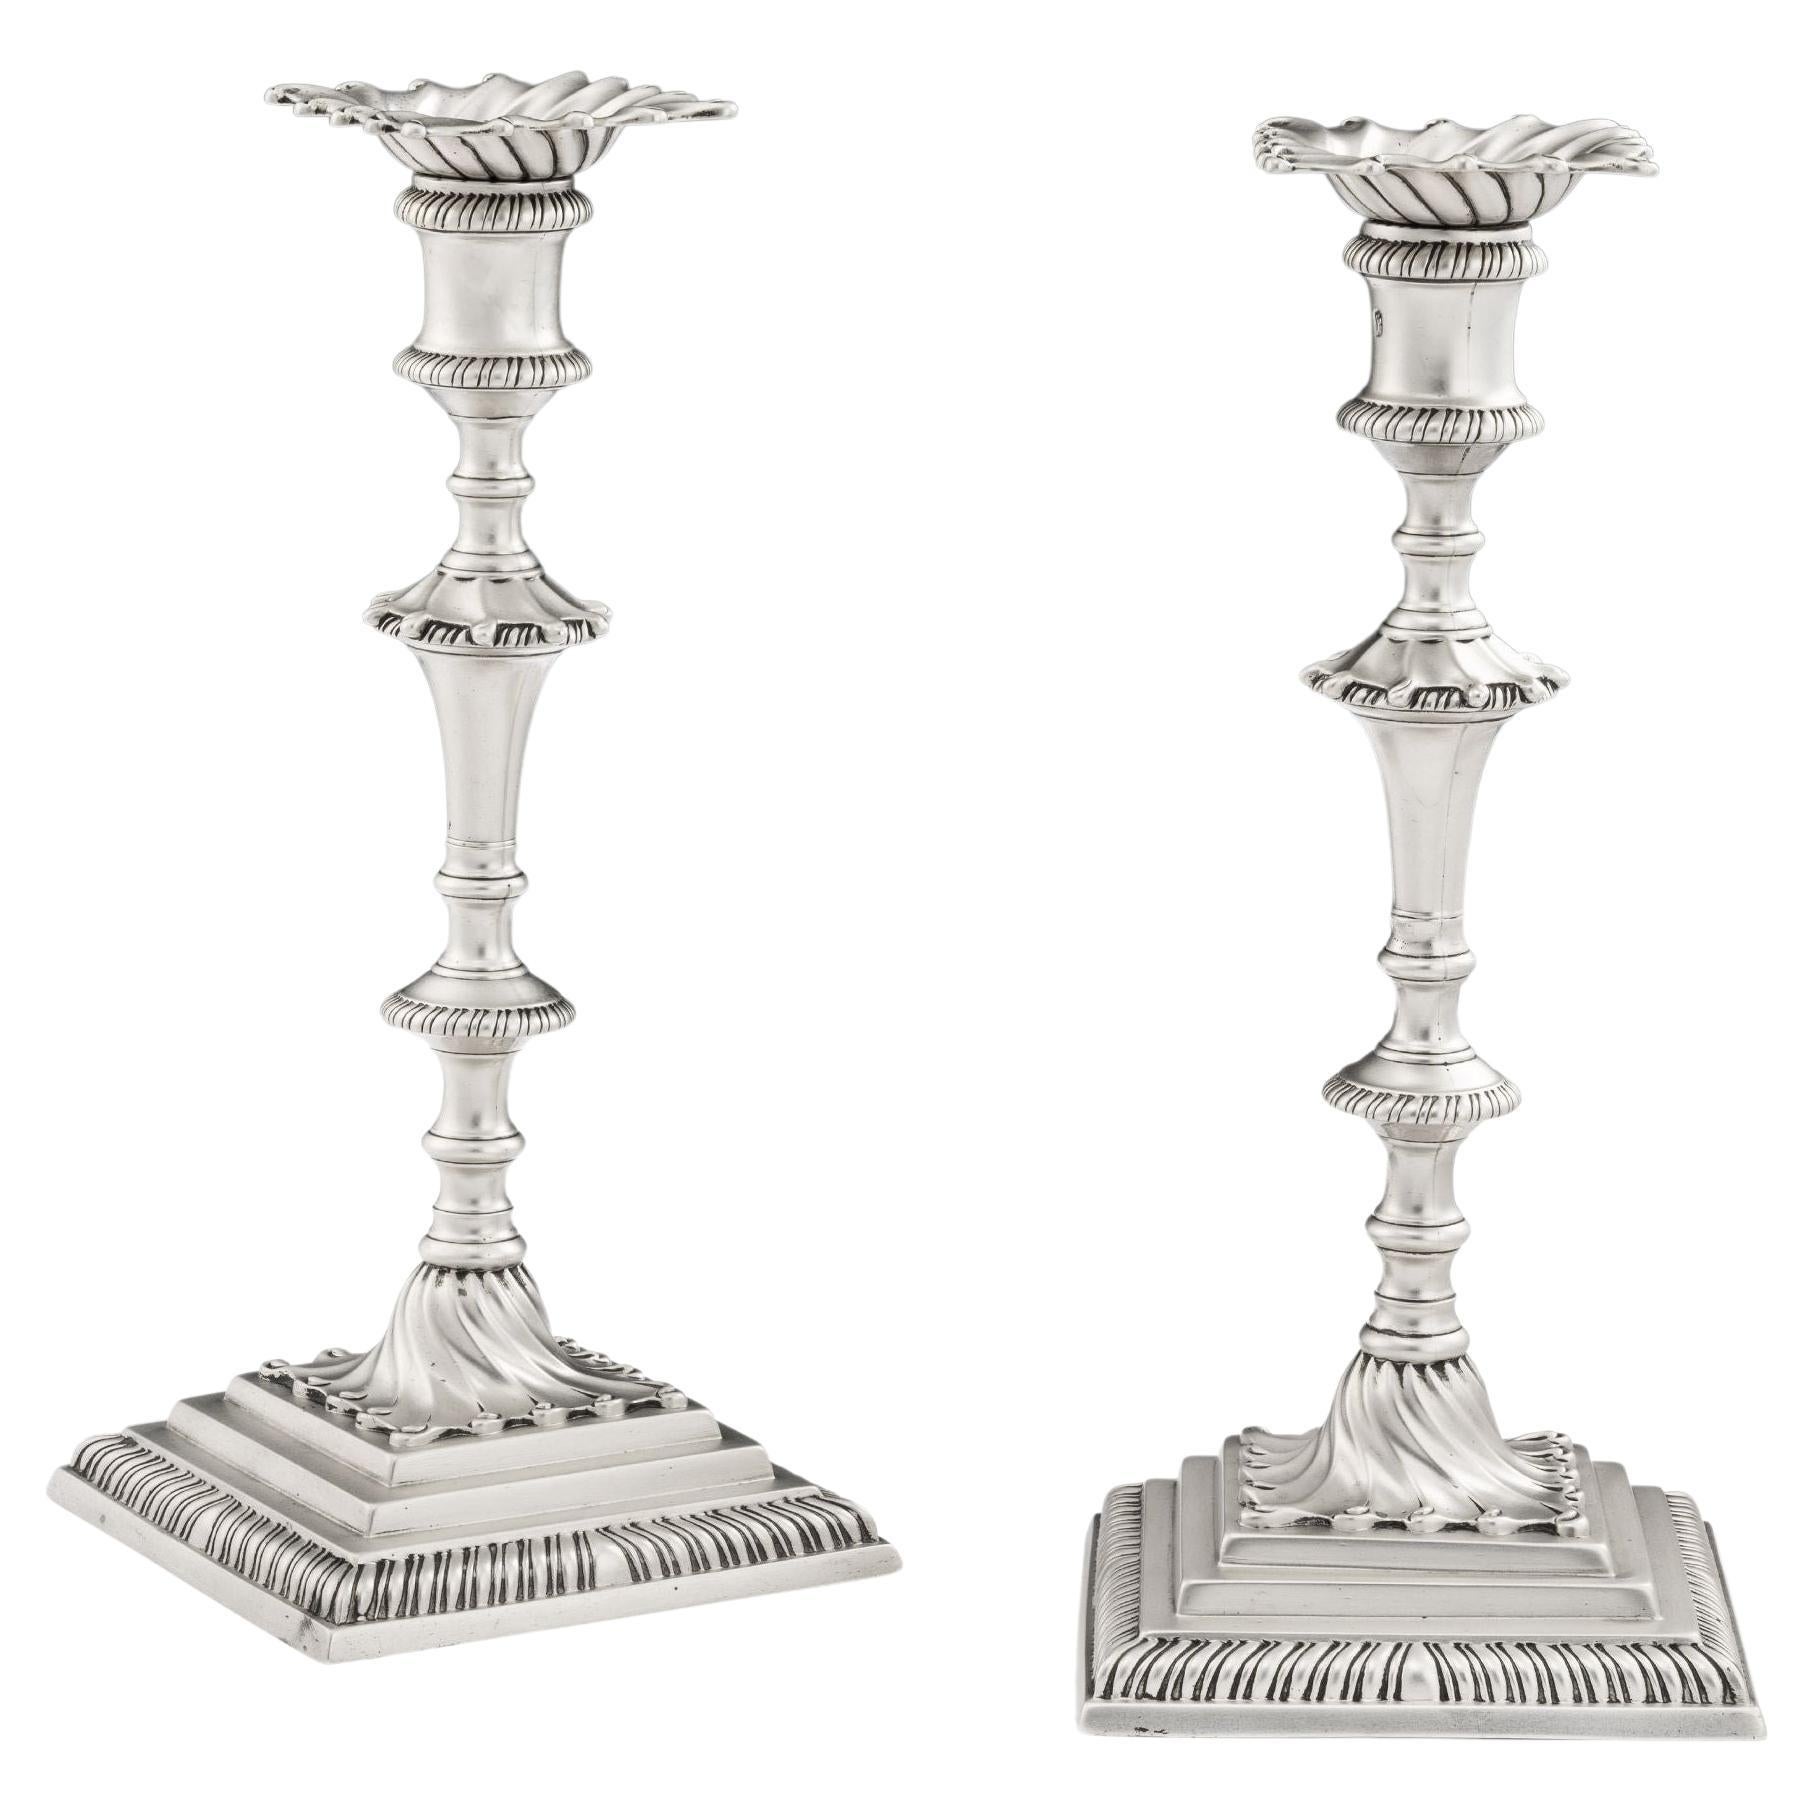 Pair of George III Cast Candlesticks Made in London in 1771 by Ebenezer Coker